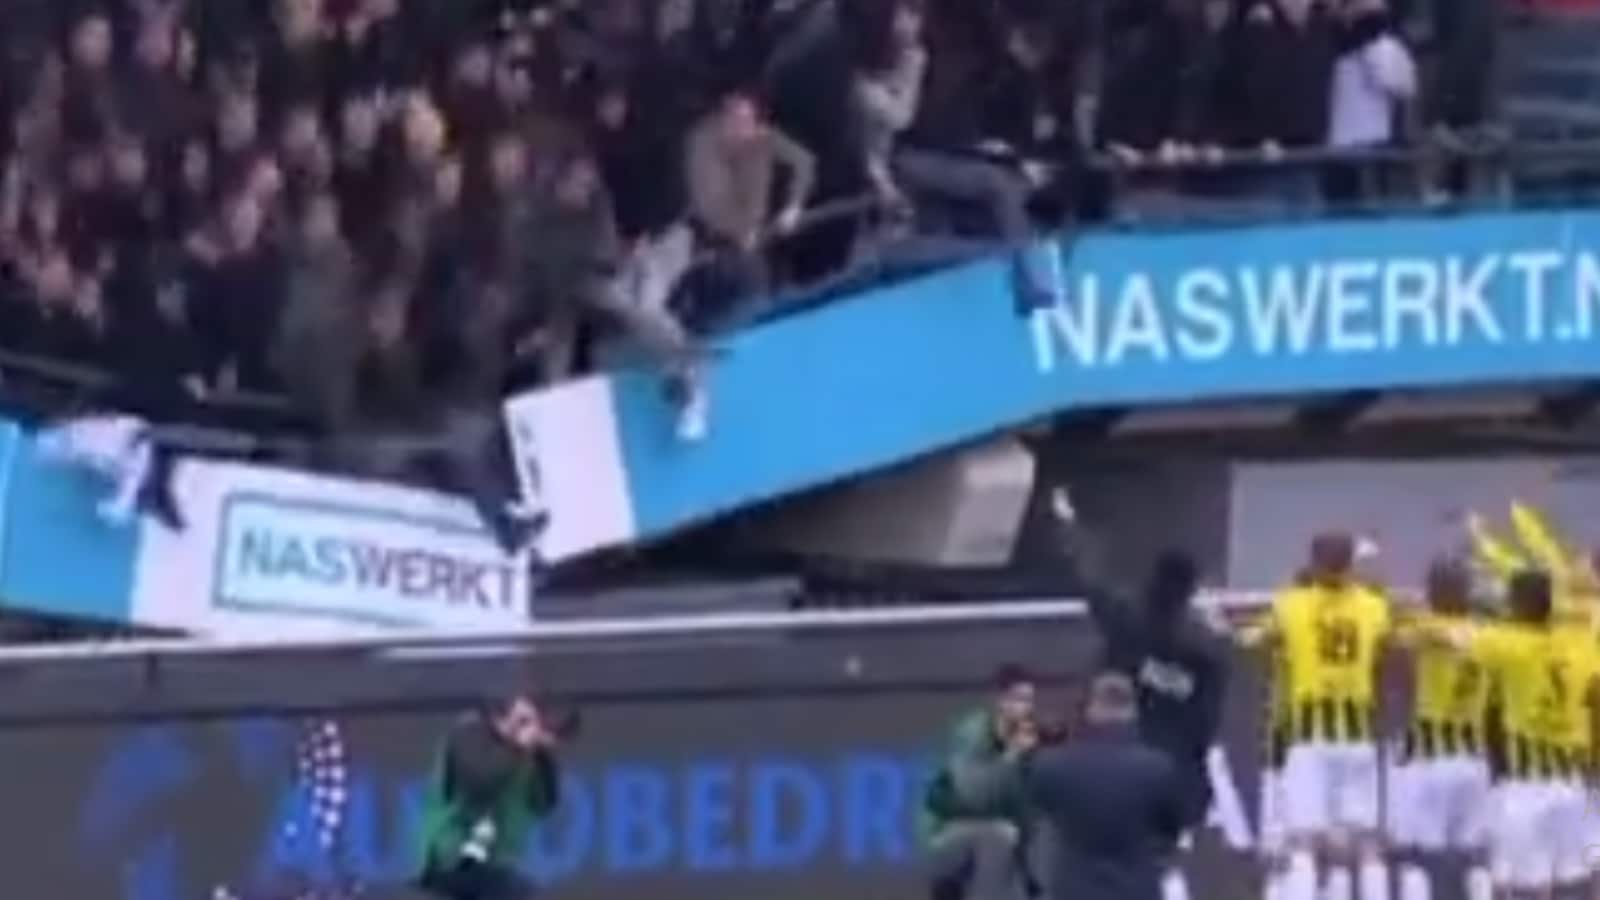 Close Call! Part of Stand at Dutch Club Nijmegen Collapses, No Injuries